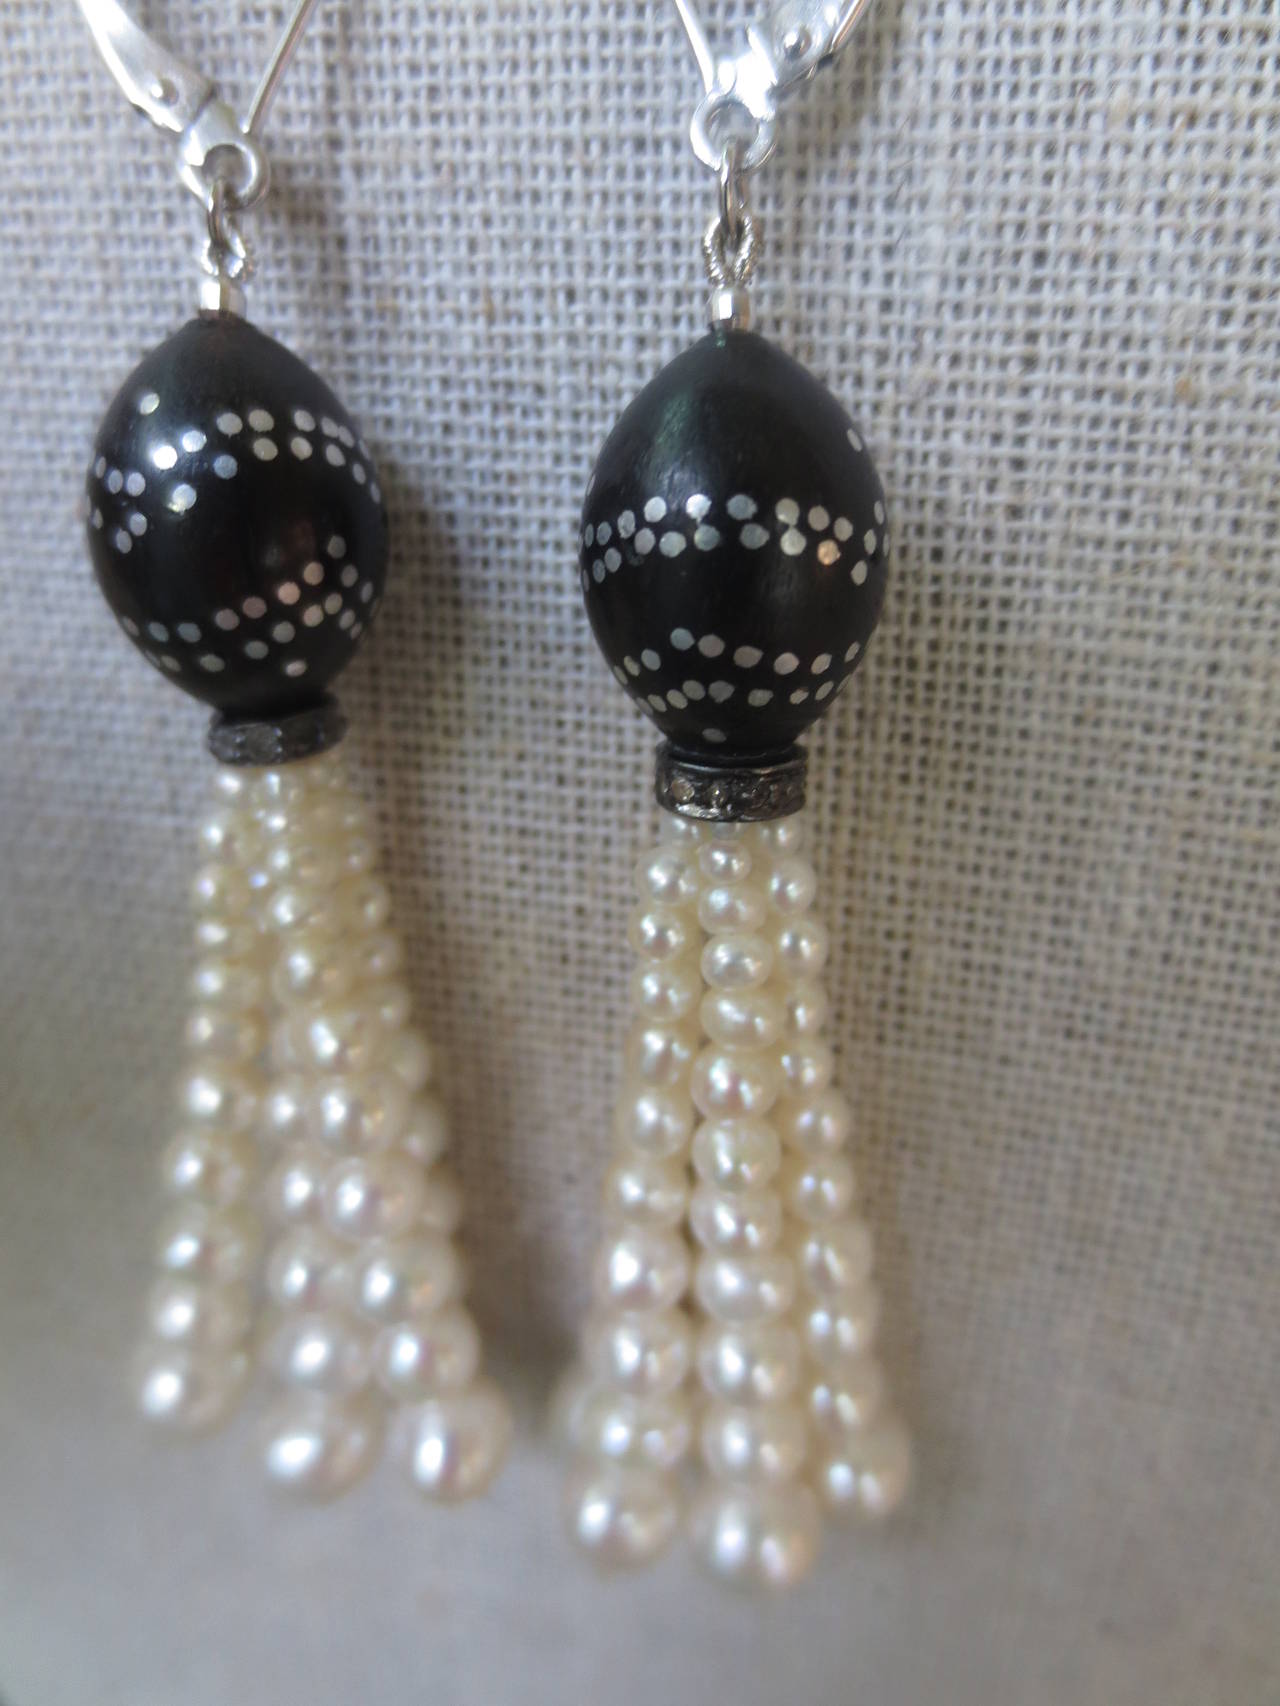 These elegant earrings feature graduated pearl strands suspended from antique bead caps. The dark caps are made of wooden beads with silver nail inlay design and are accented with a diamond encrusted sterling silver rondelle at the base. Ear-wires